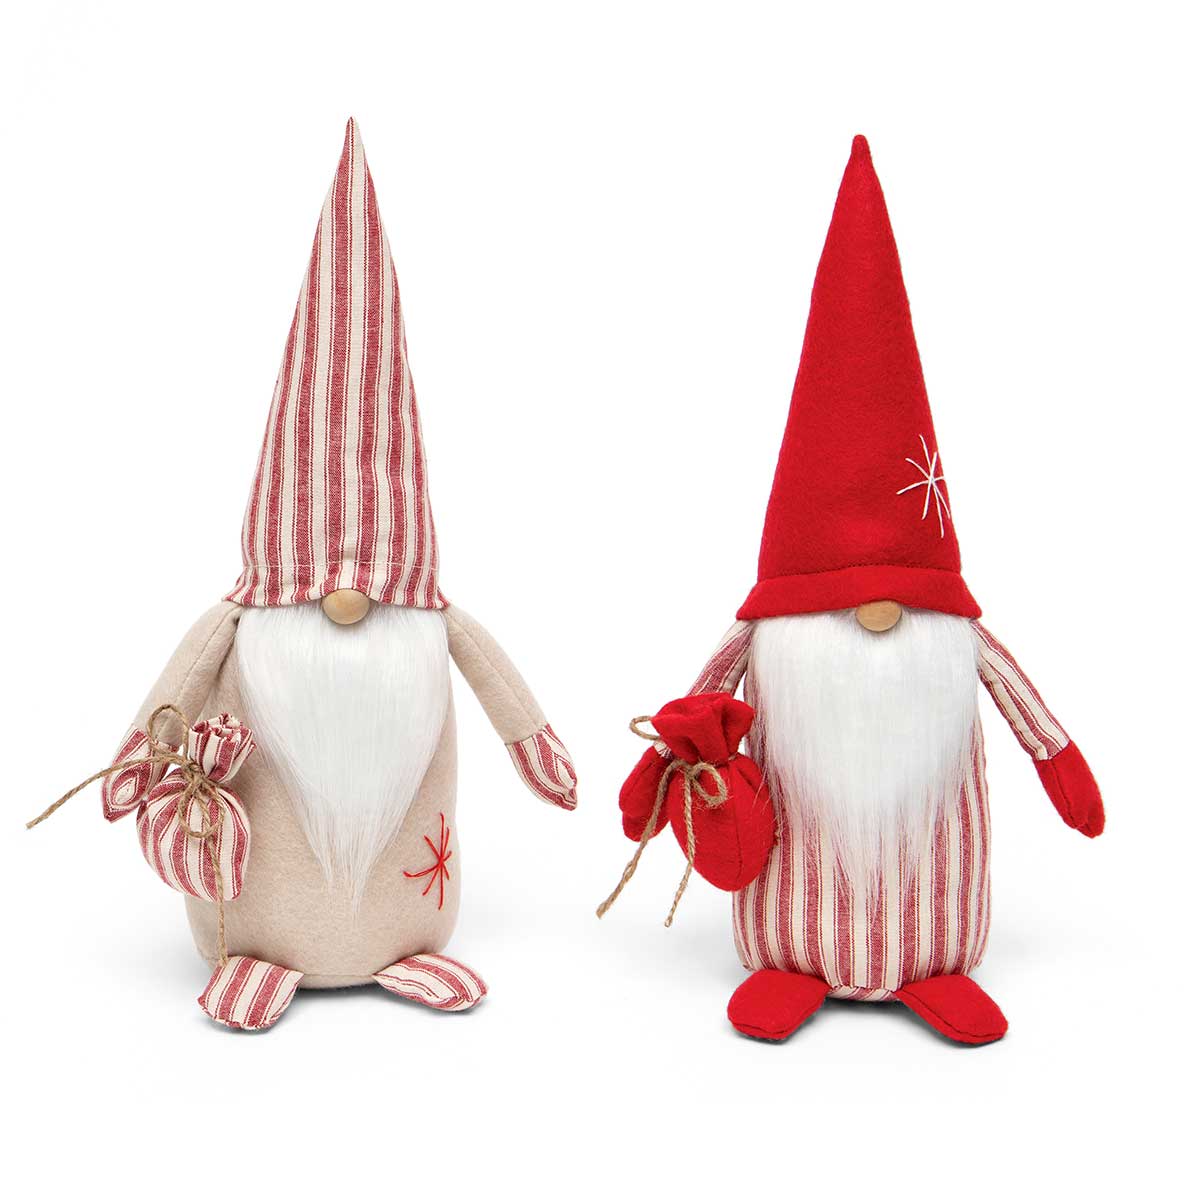 KRIS GNOME RED/BEIGE WITH BAG, TICKING, WOOD NOSE